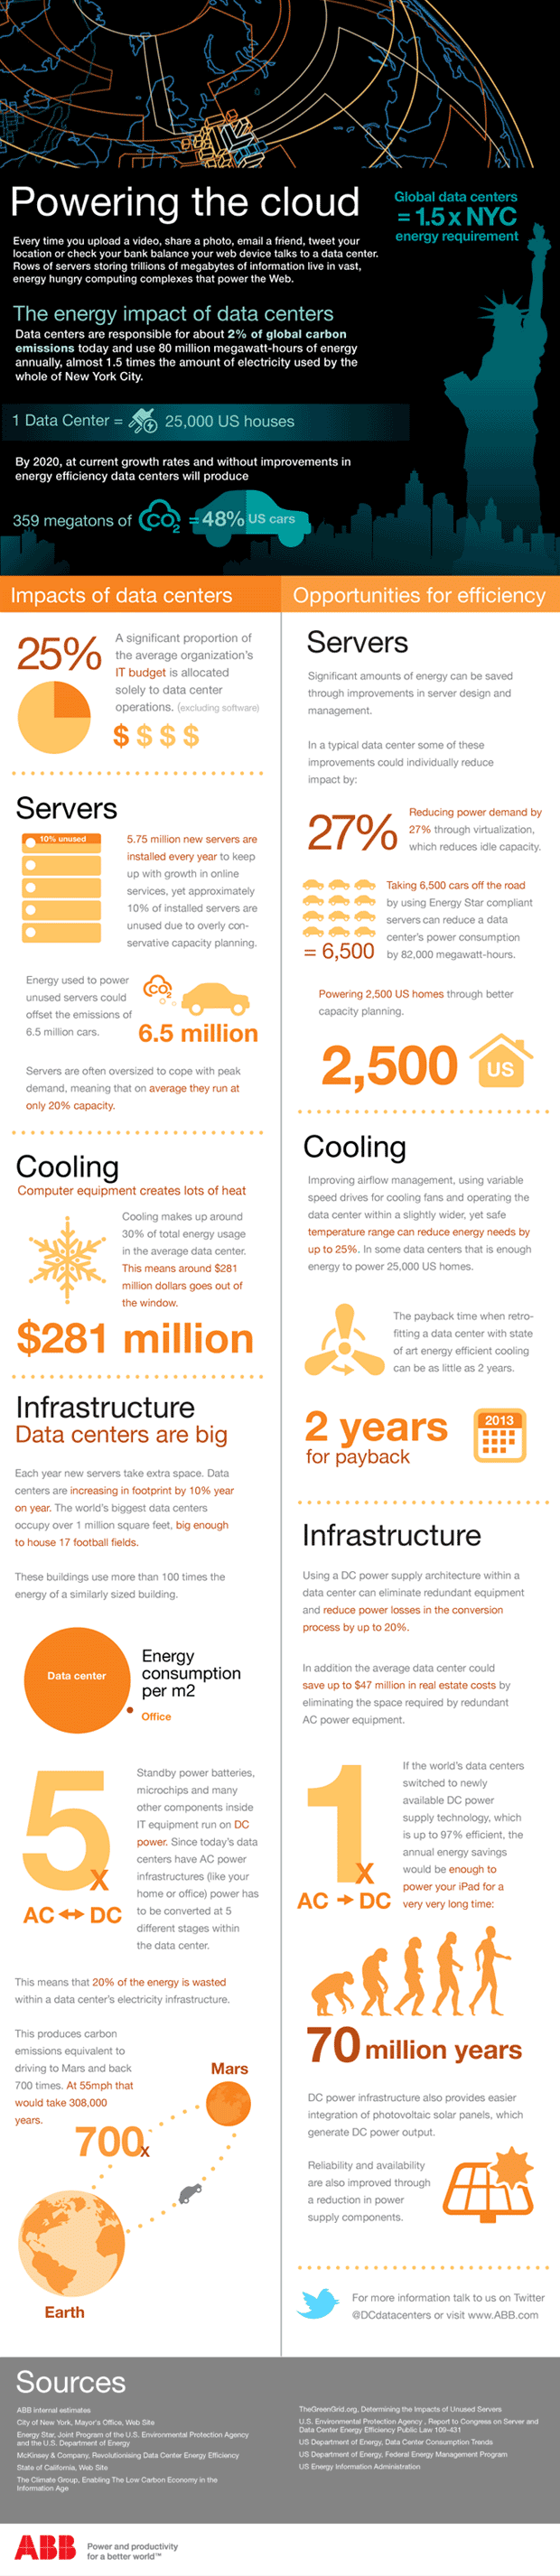 Infographic: Powering the Cloud Infographic